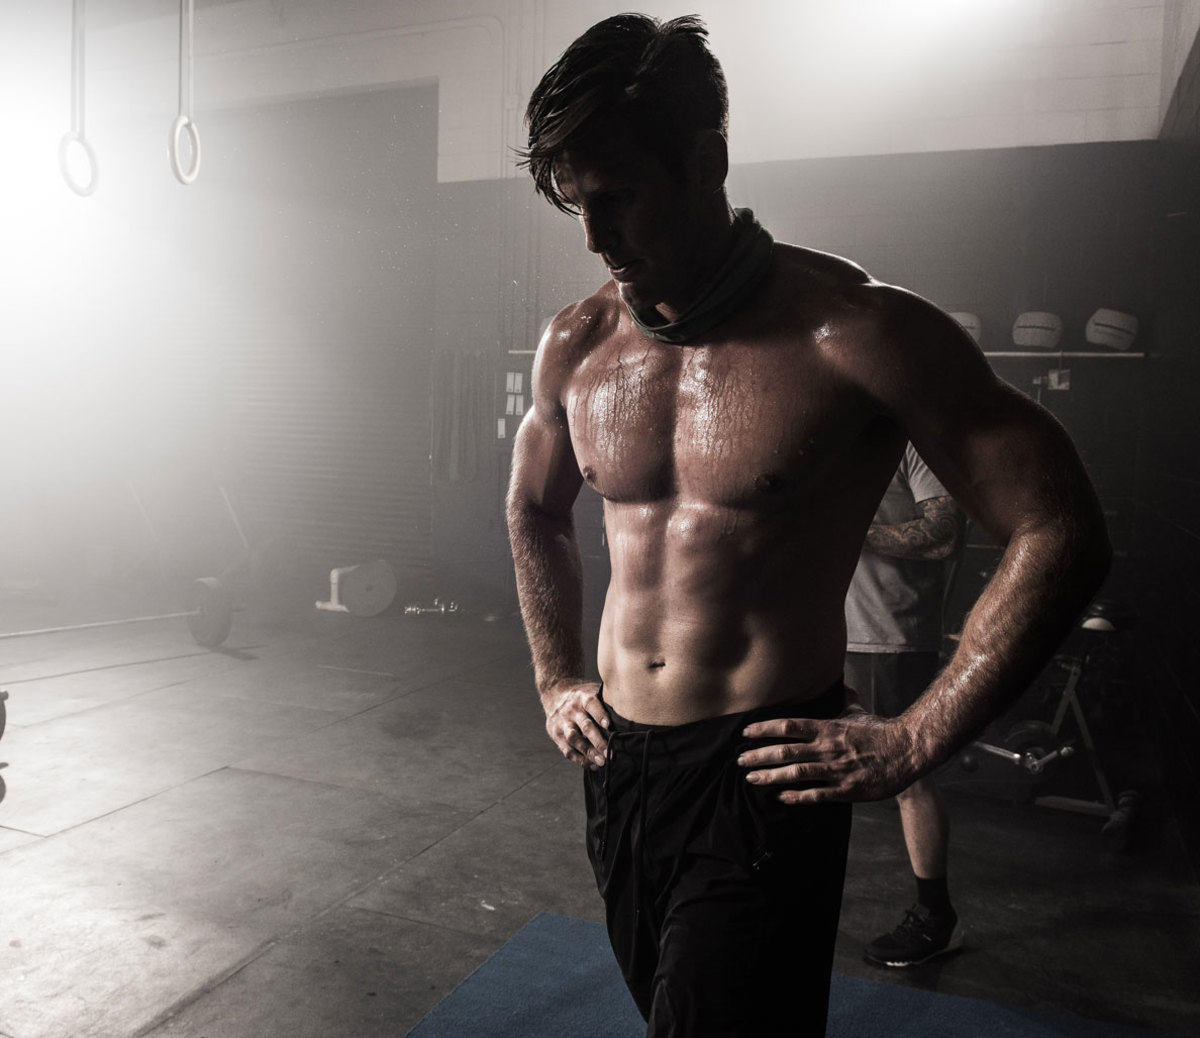 5 Ways to Tell You've Bulked Too Much and How to Fix It - Muscle